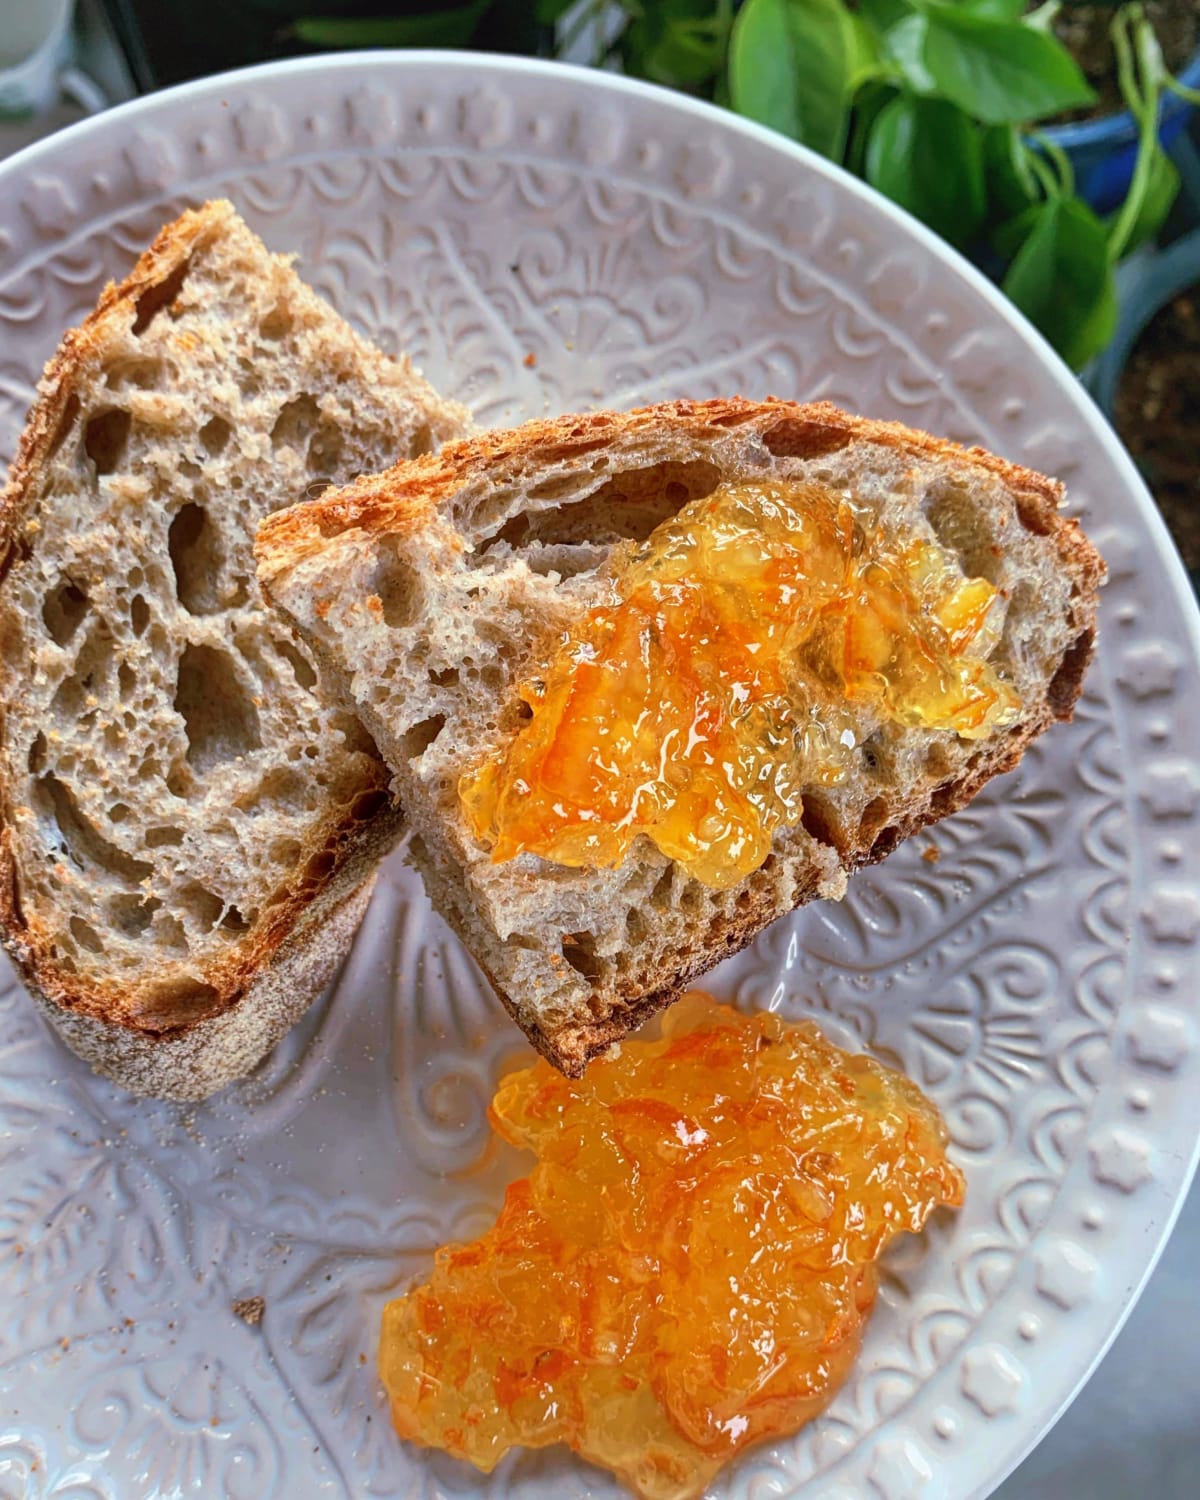 Put toasted sesame oil and marmalade on your sourdough. Trust me.